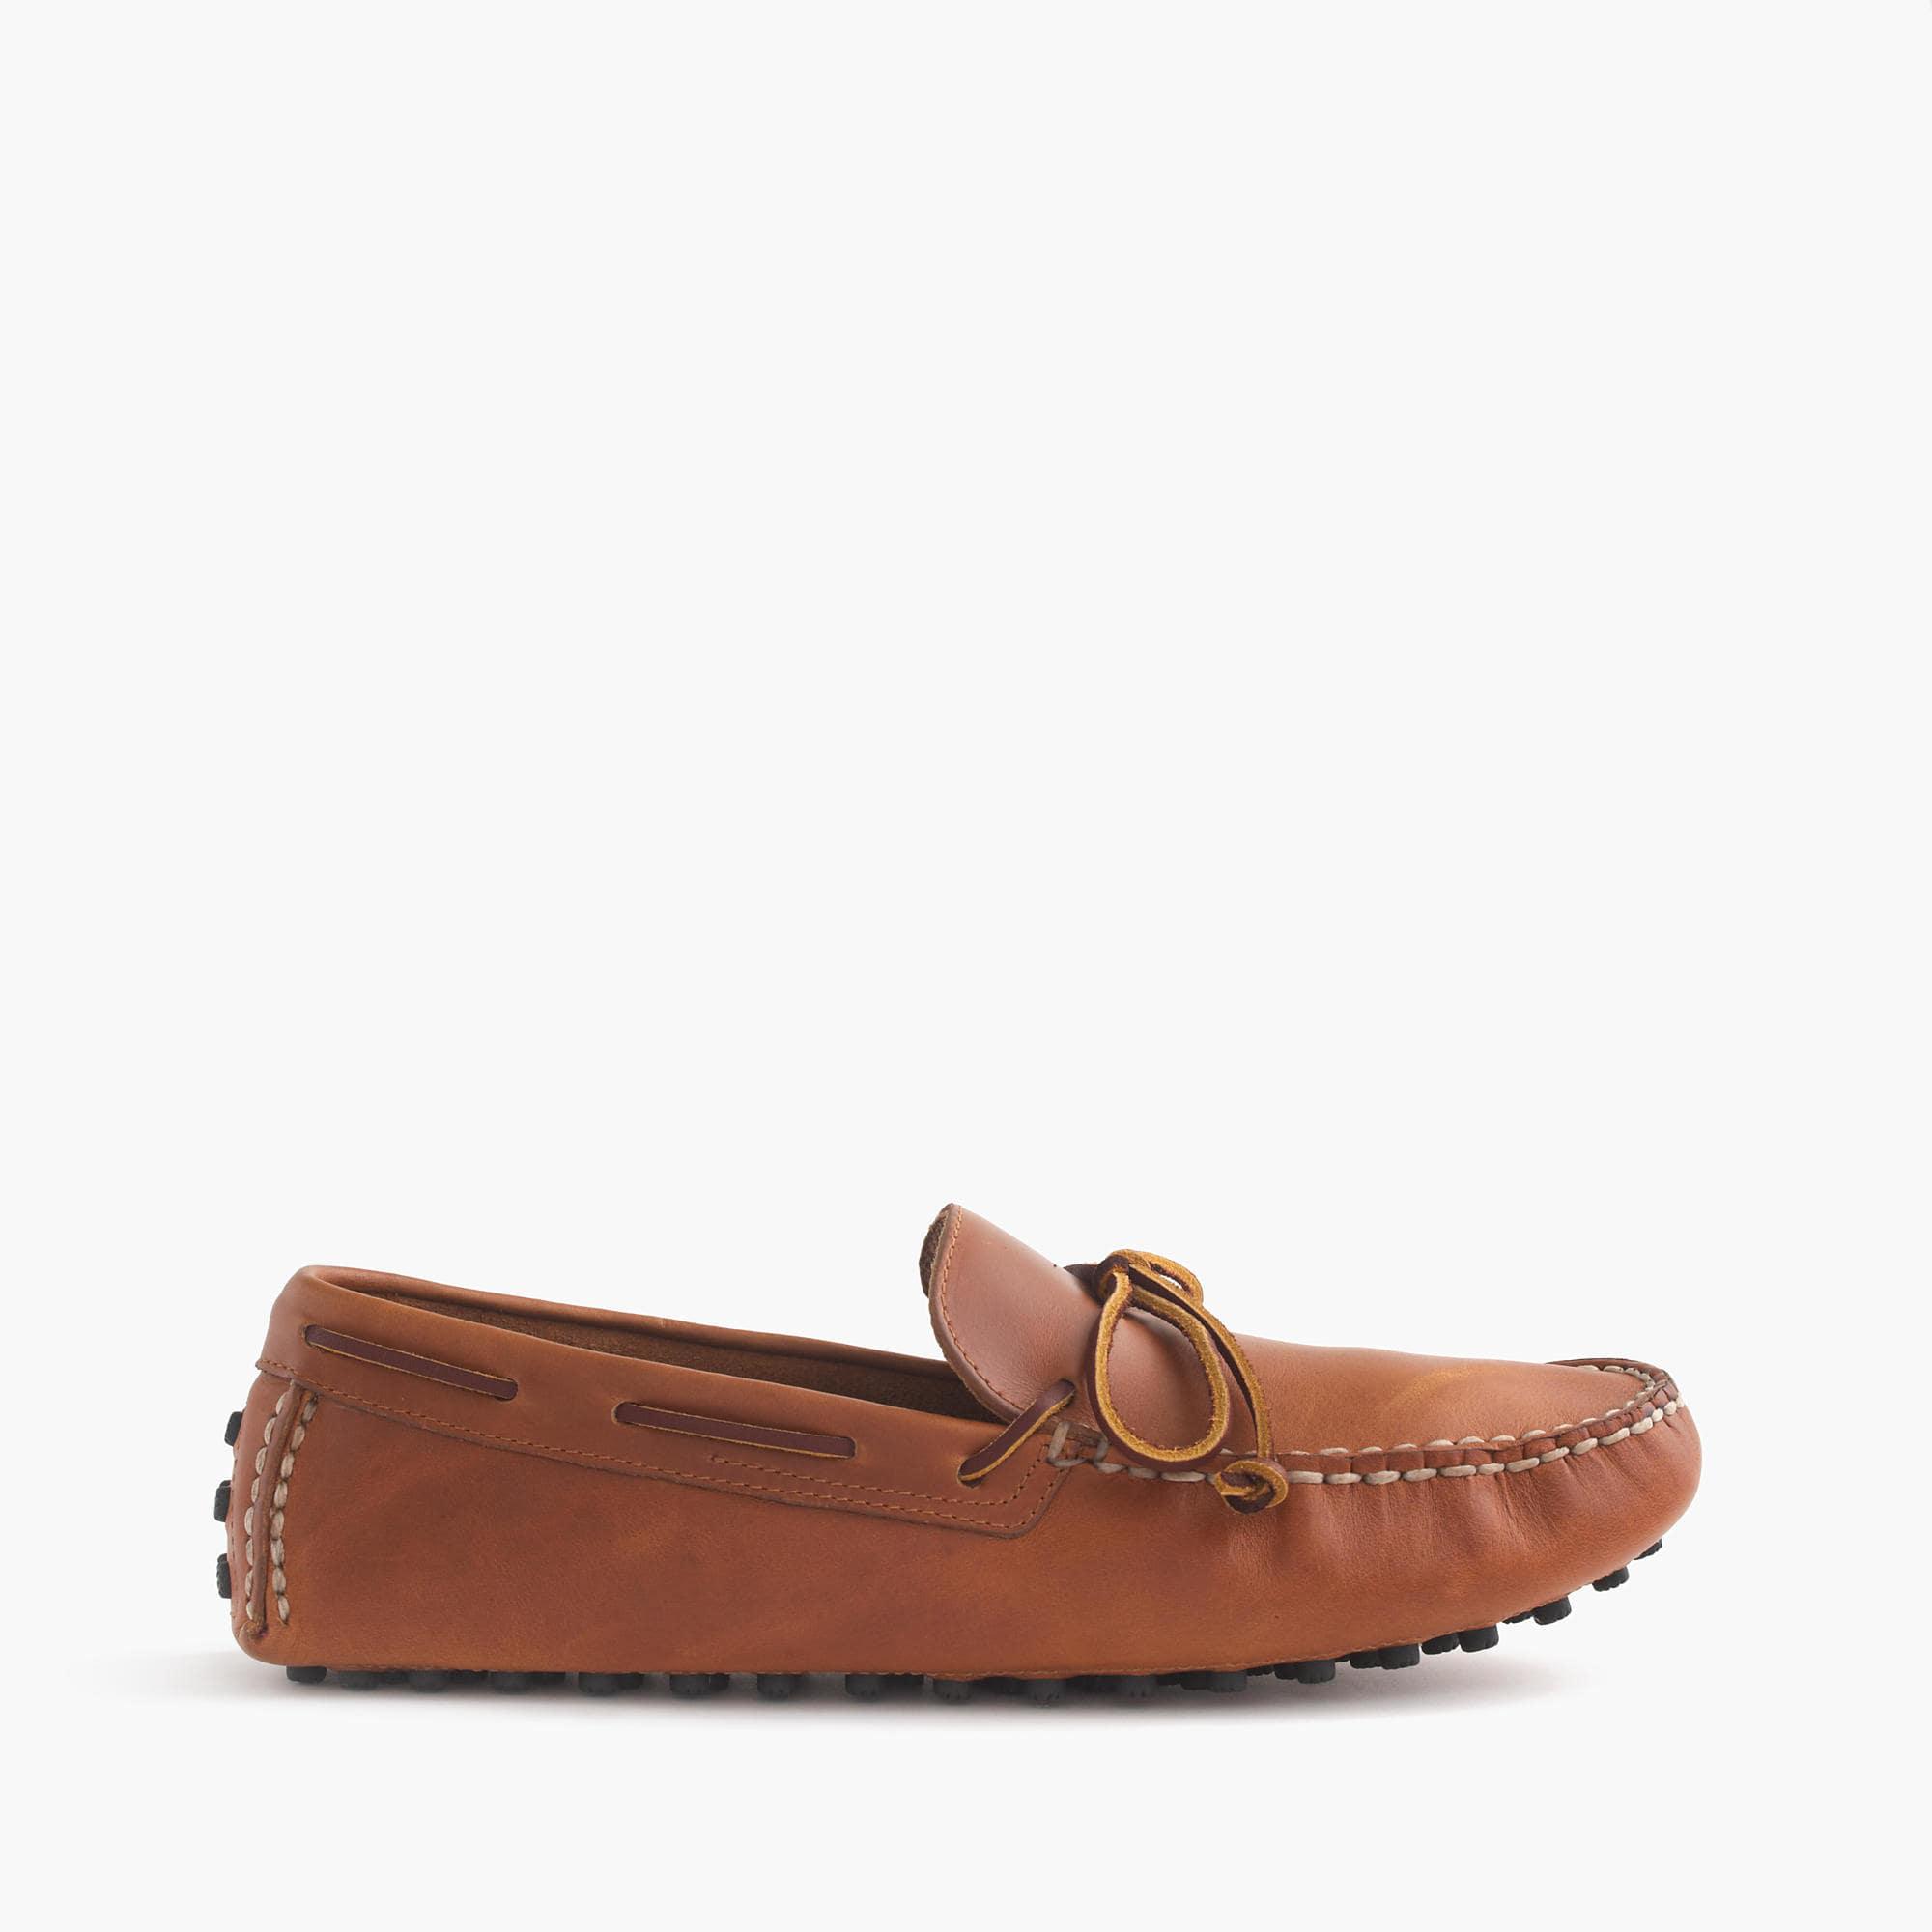 Sperry Driving Moccasins Store, SAVE 59% - mpgc.net